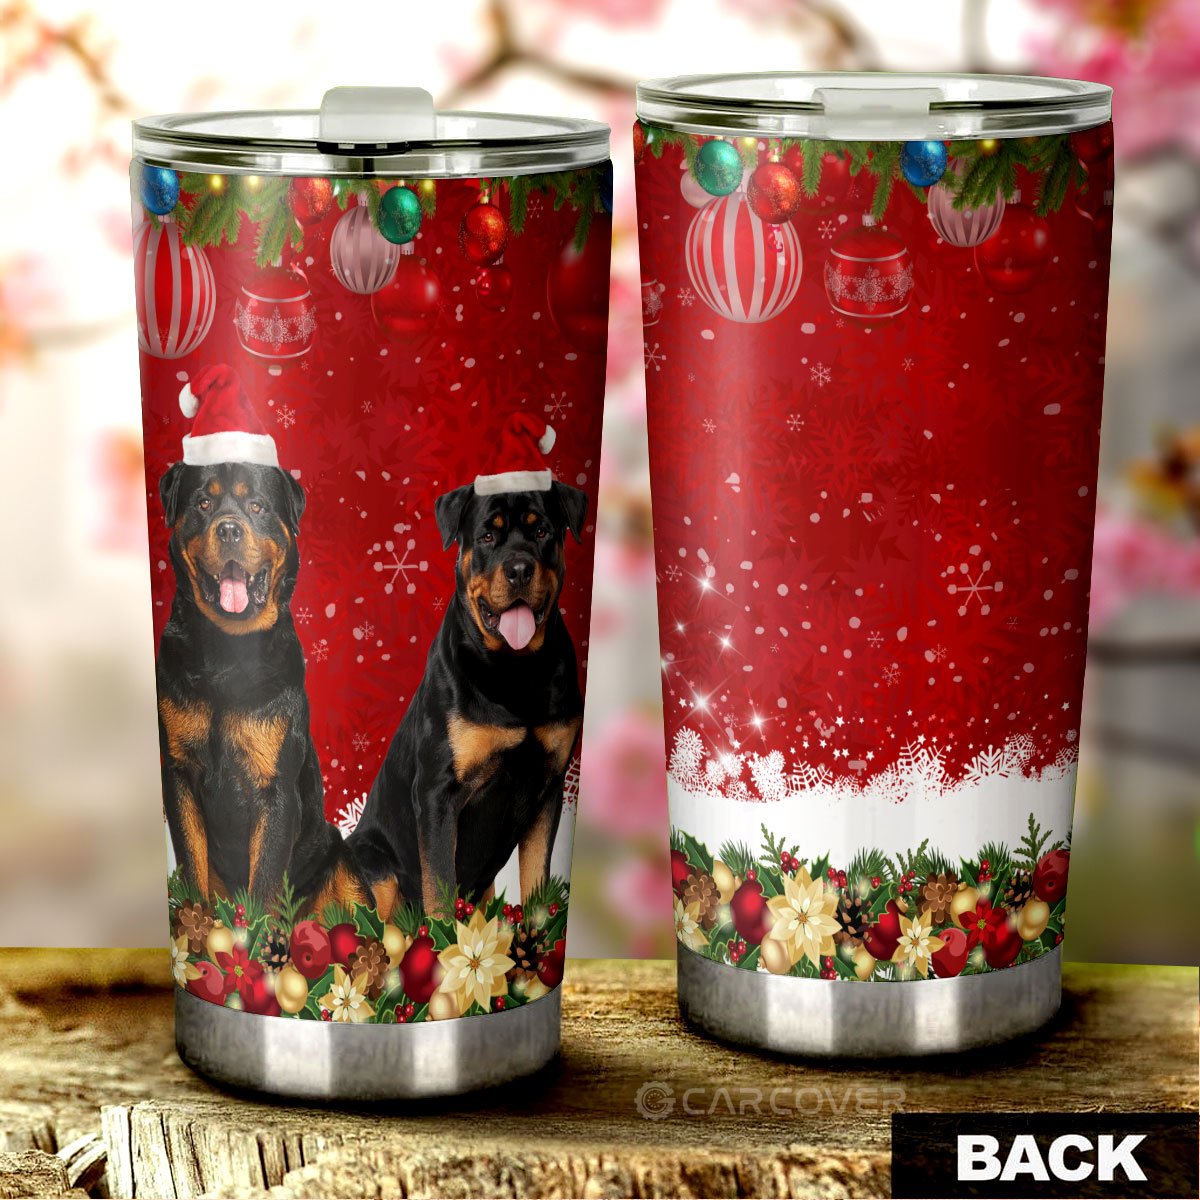 Rottweilers Tumbler Cup Custom Xmas Car Accessories - Gearcarcover - 4